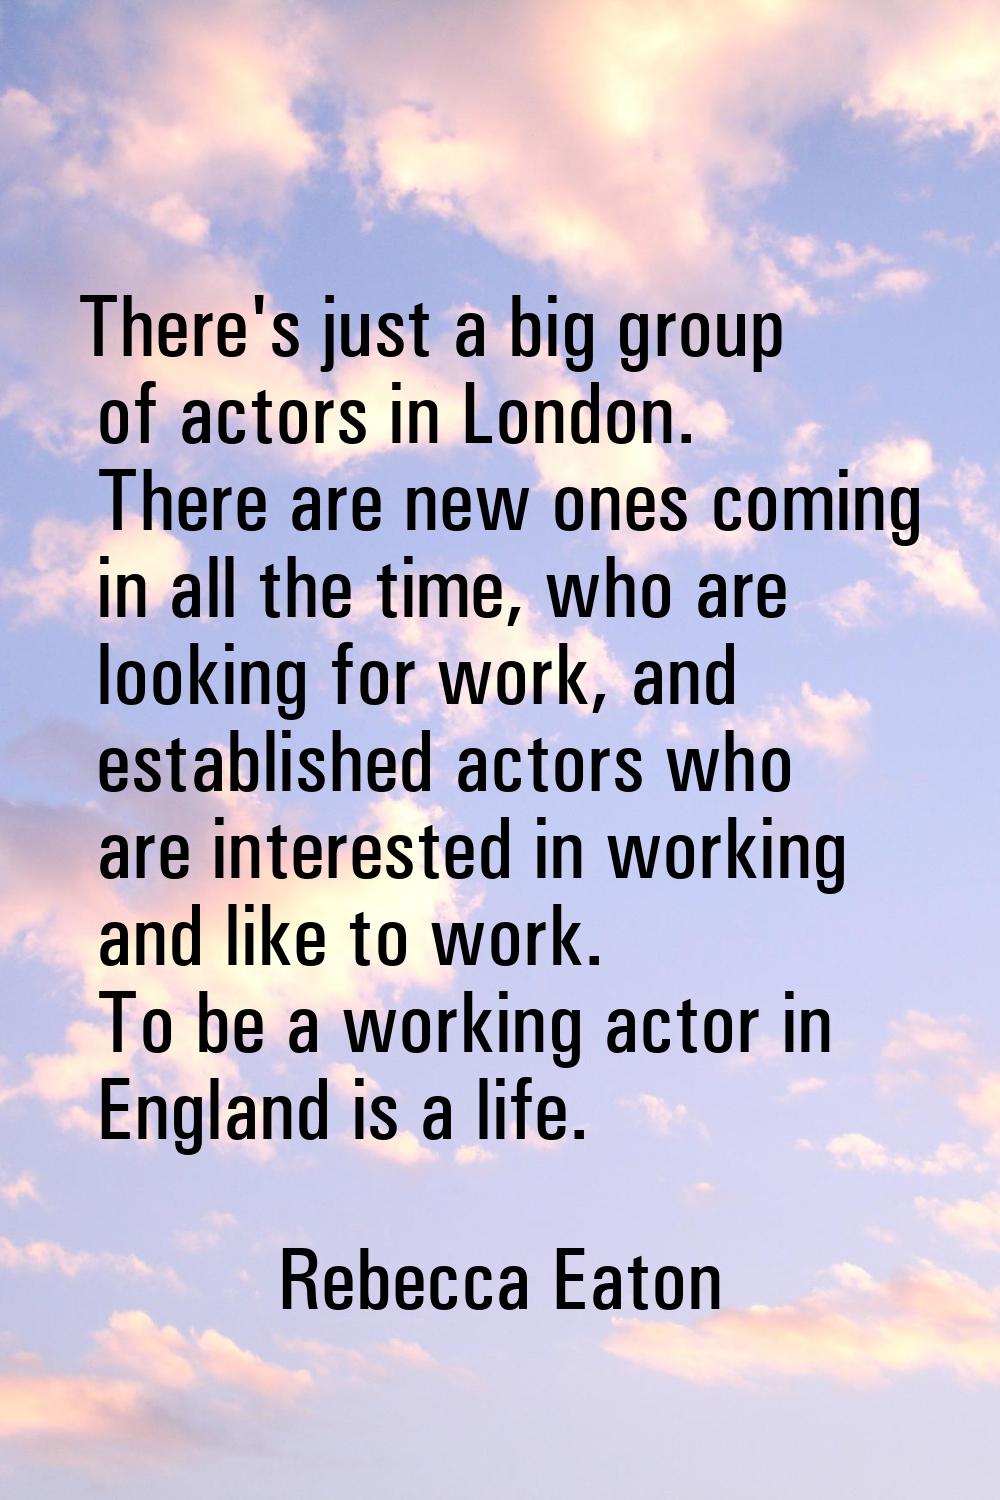 There's just a big group of actors in London. There are new ones coming in all the time, who are lo